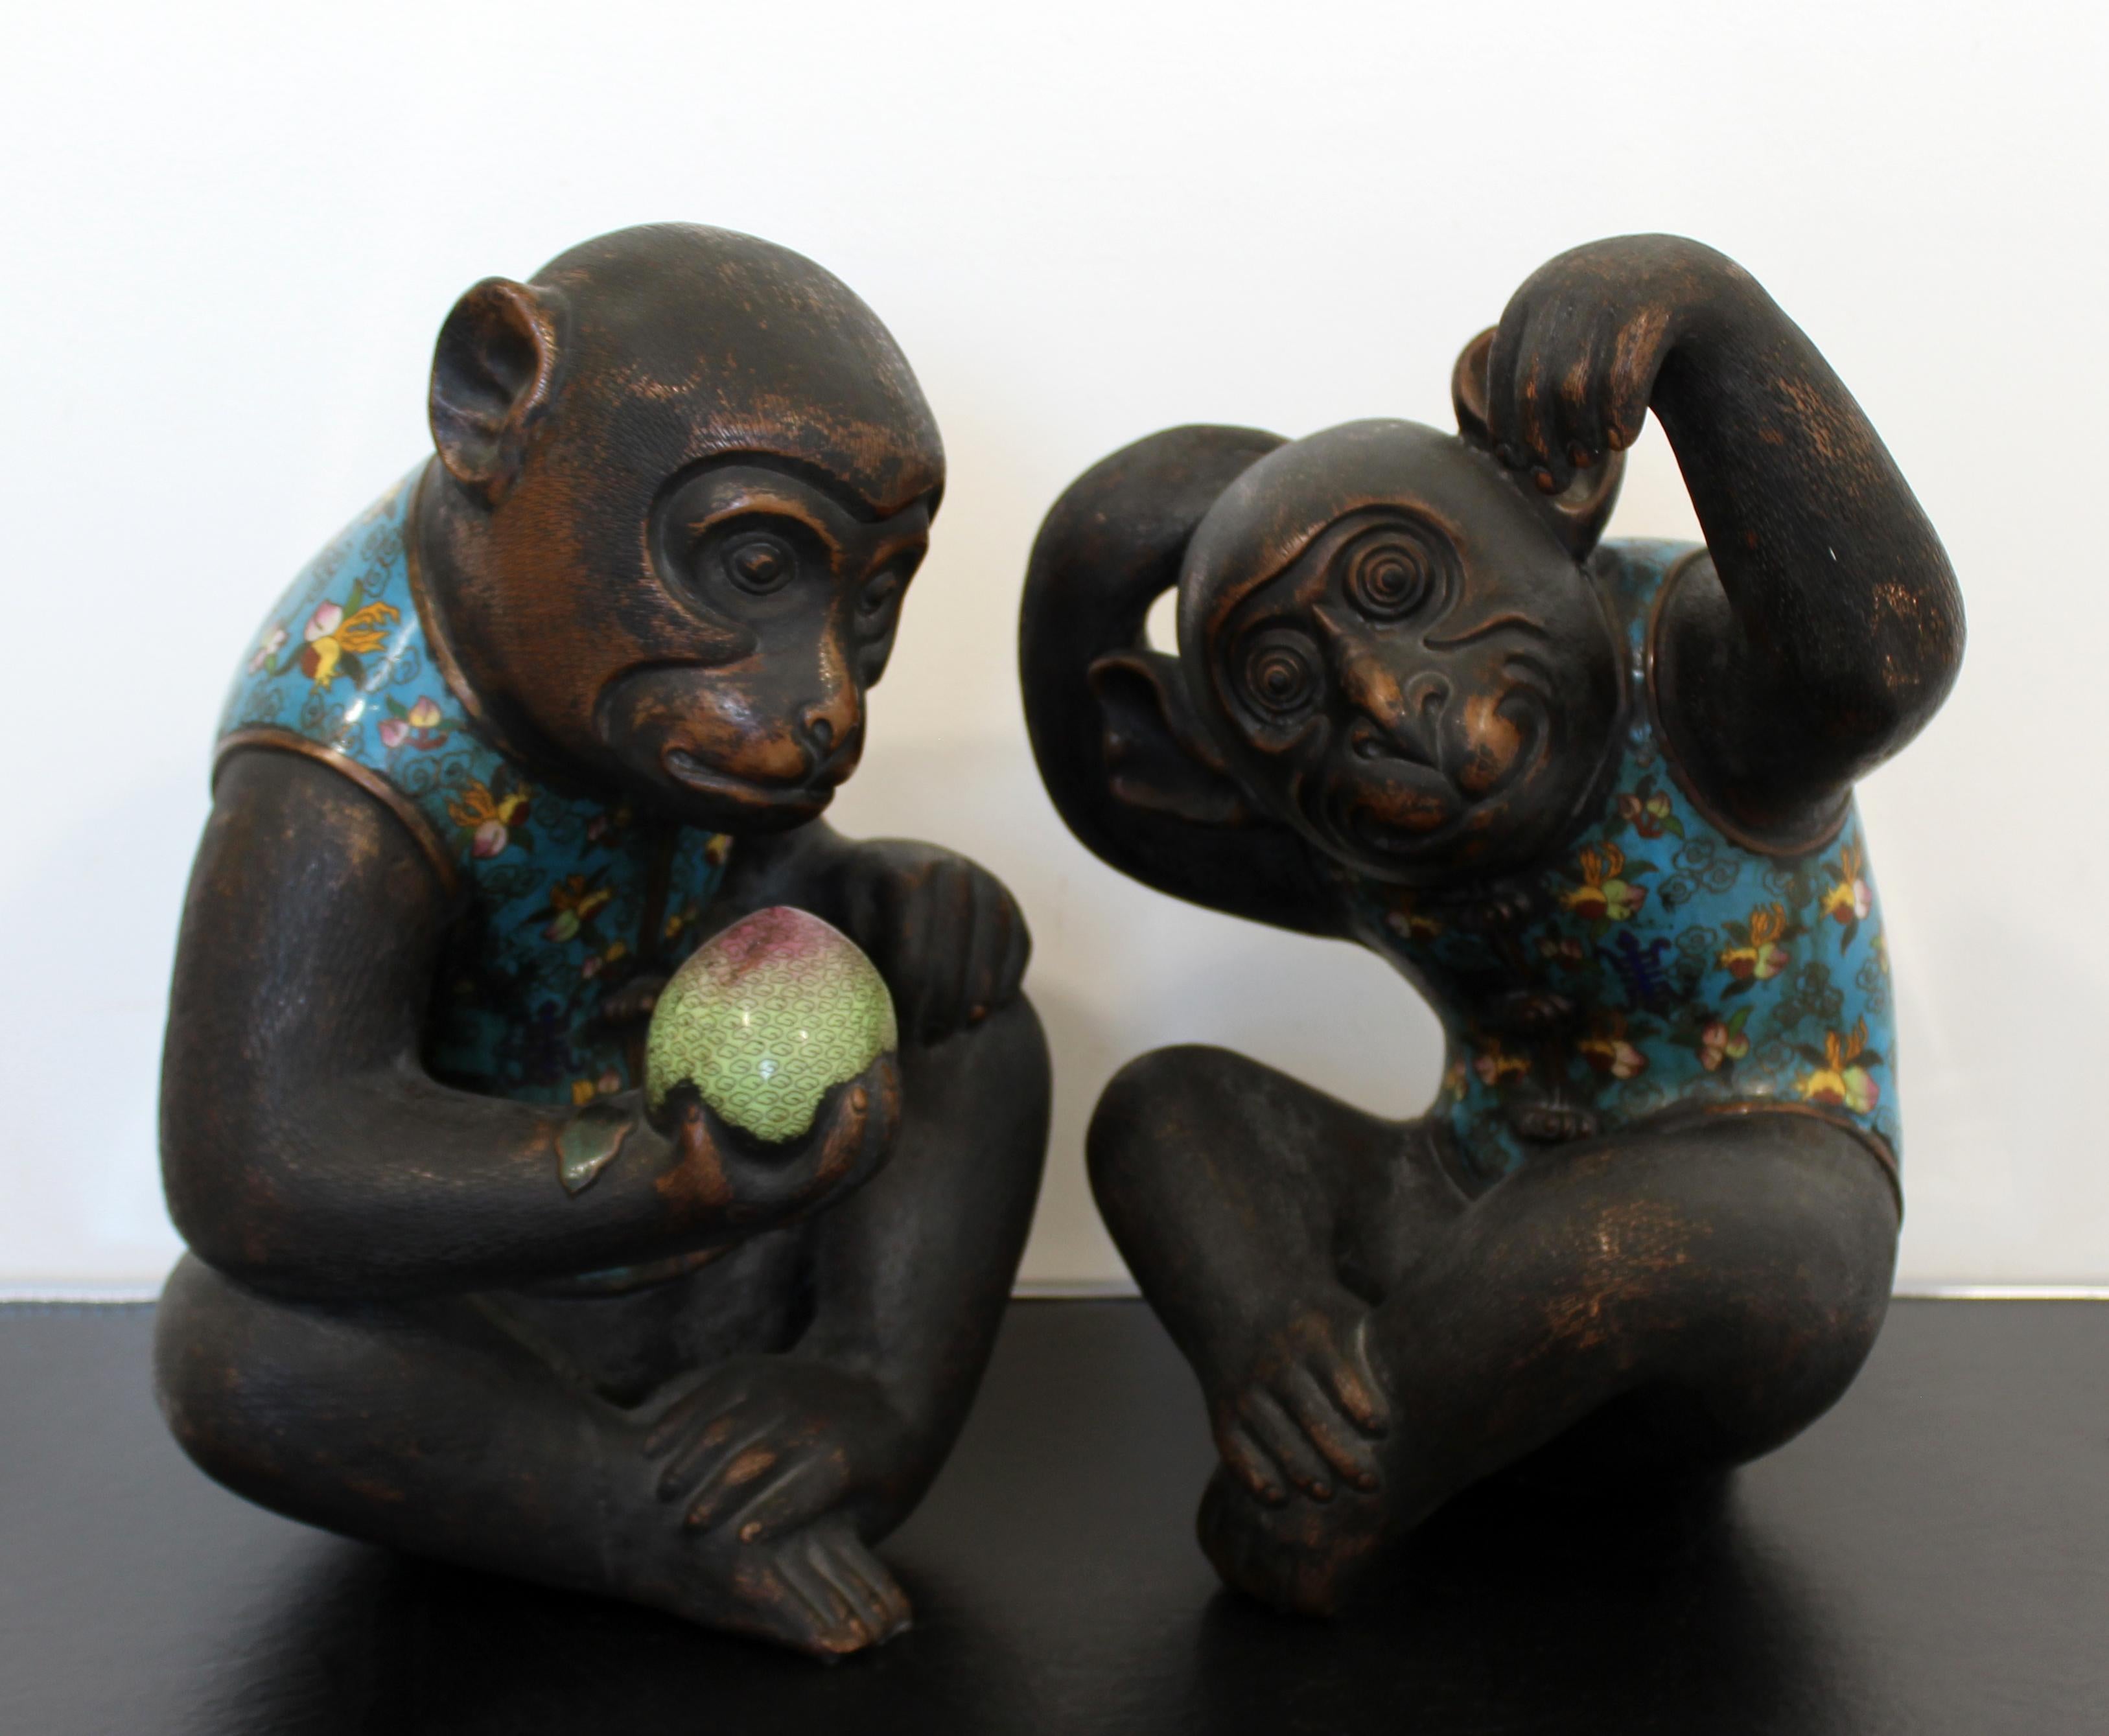 For your consideration is a fantastic pair of metal cloisonné table sculptures, of two monkeys in chinoiserie vests, by Robert Kuo. In excellent condition. The dimensions are 11